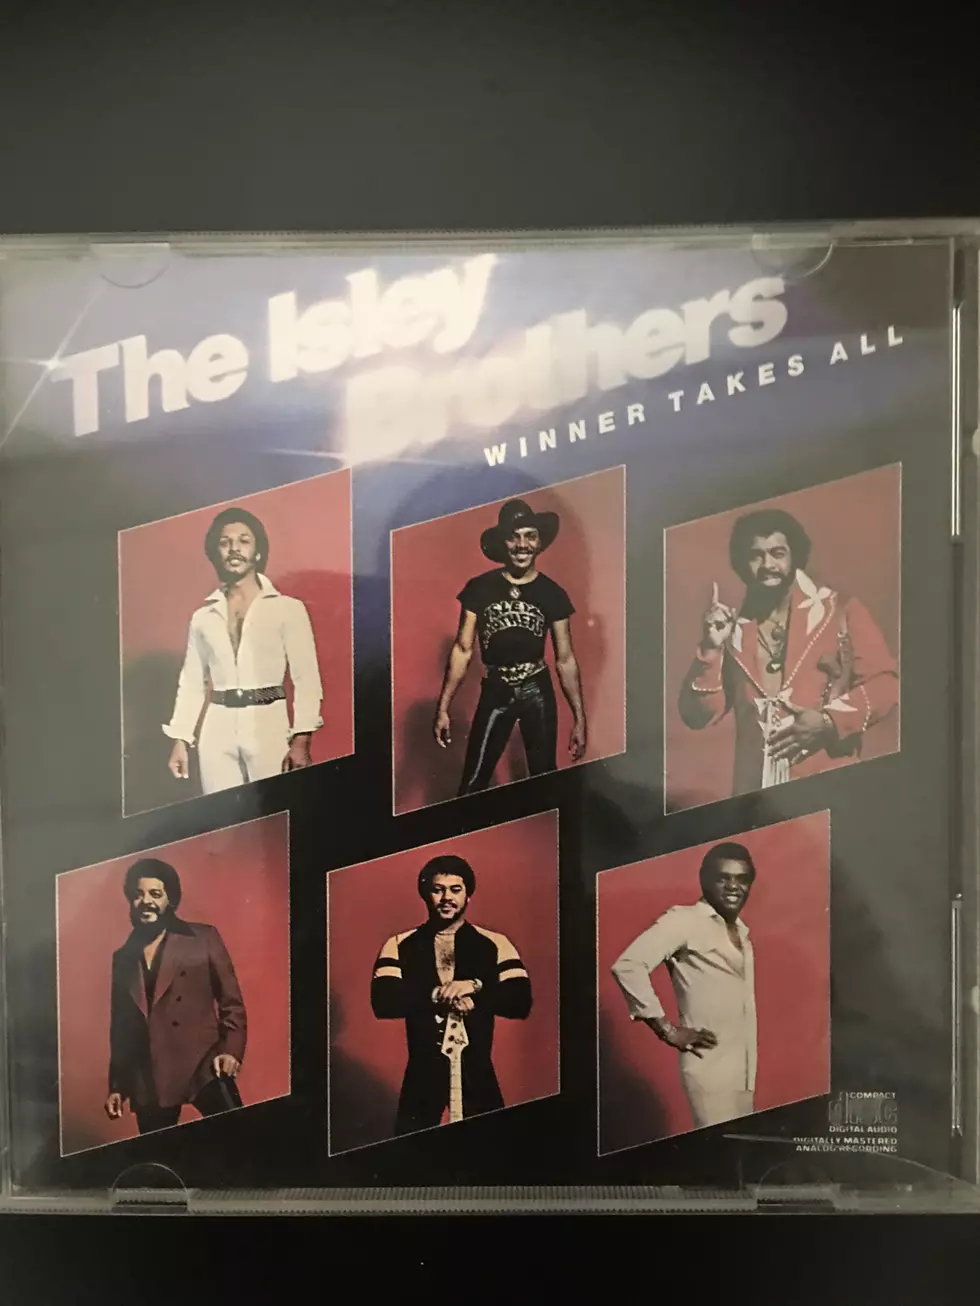 Artist Spotlight Wednesday Featuring the Isley Brothers